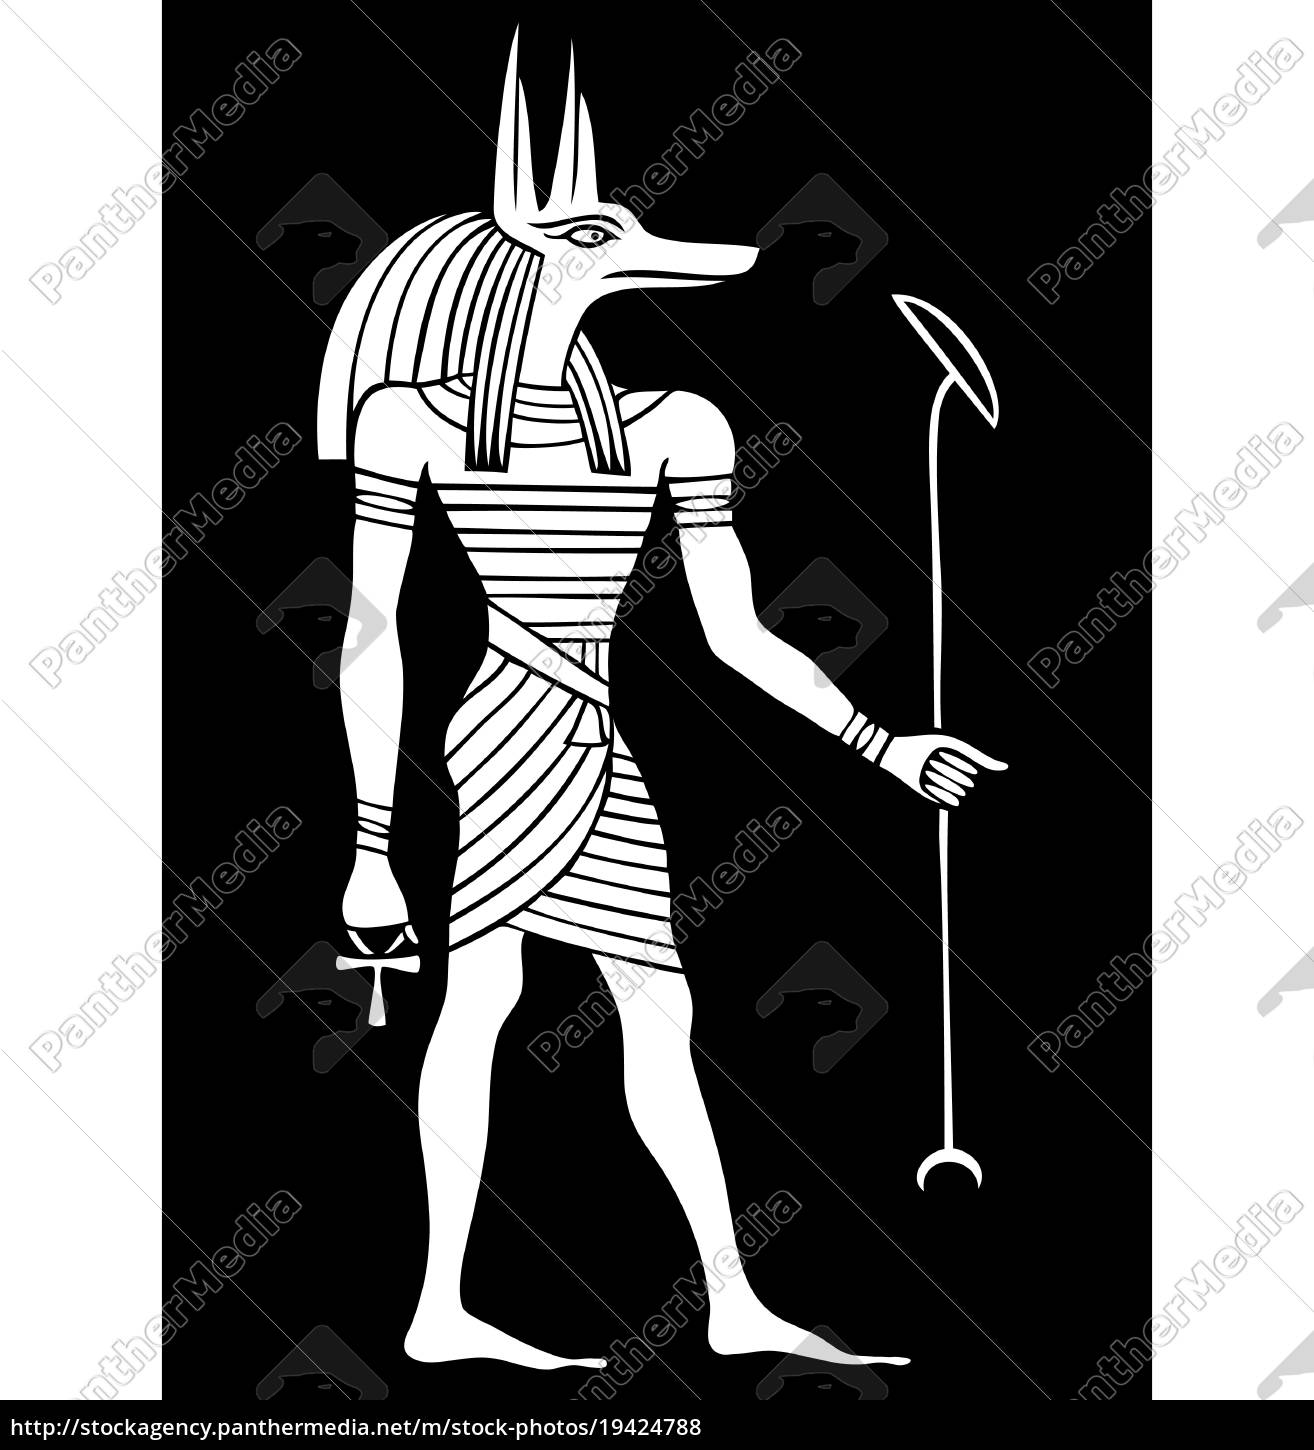 Anubis God Of Ancient Egypt Royalty Free Photo 19424788 Panthermedia Stock Agency 